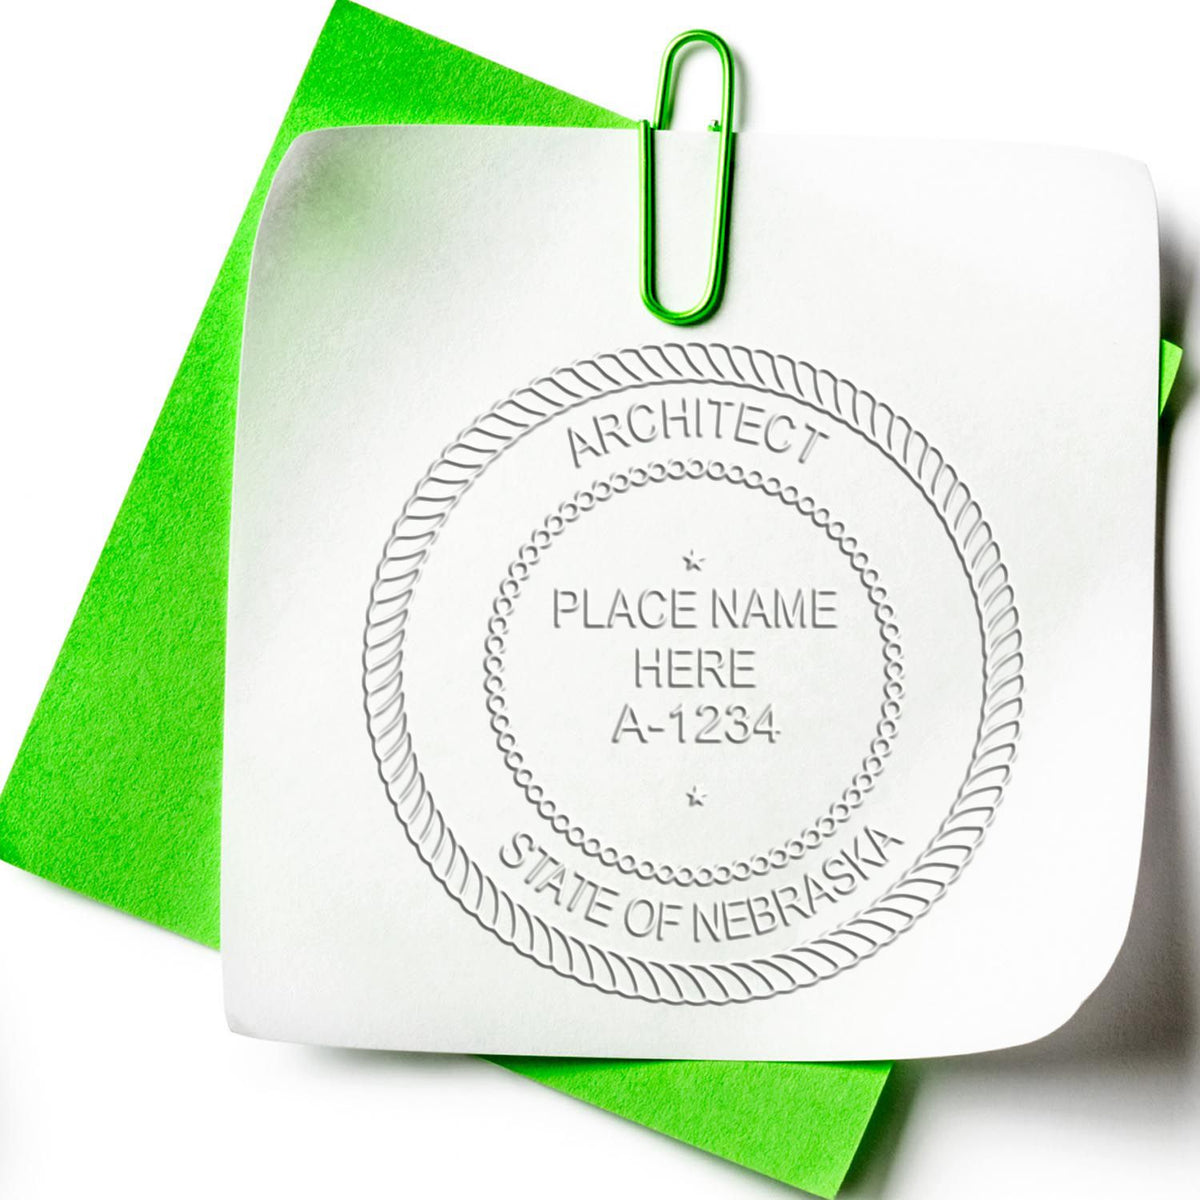 A stamped imprint of the Gift Nebraska Architect Seal in this stylish lifestyle photo, setting the tone for a unique and personalized product.